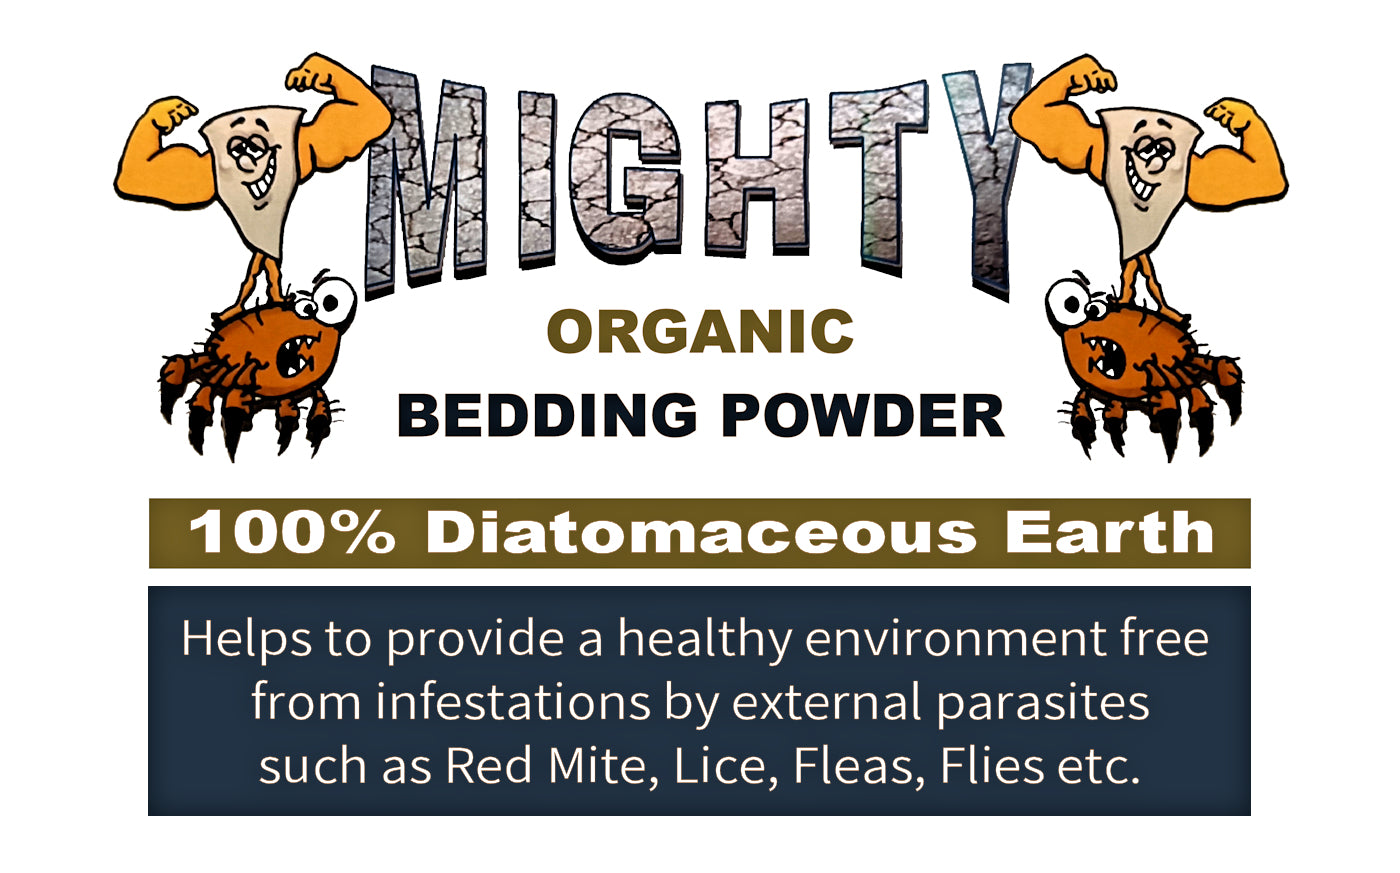 Mighty Organic Bedding Powder (Diatomaceous Earth) - Buy Online SPR Centre UK